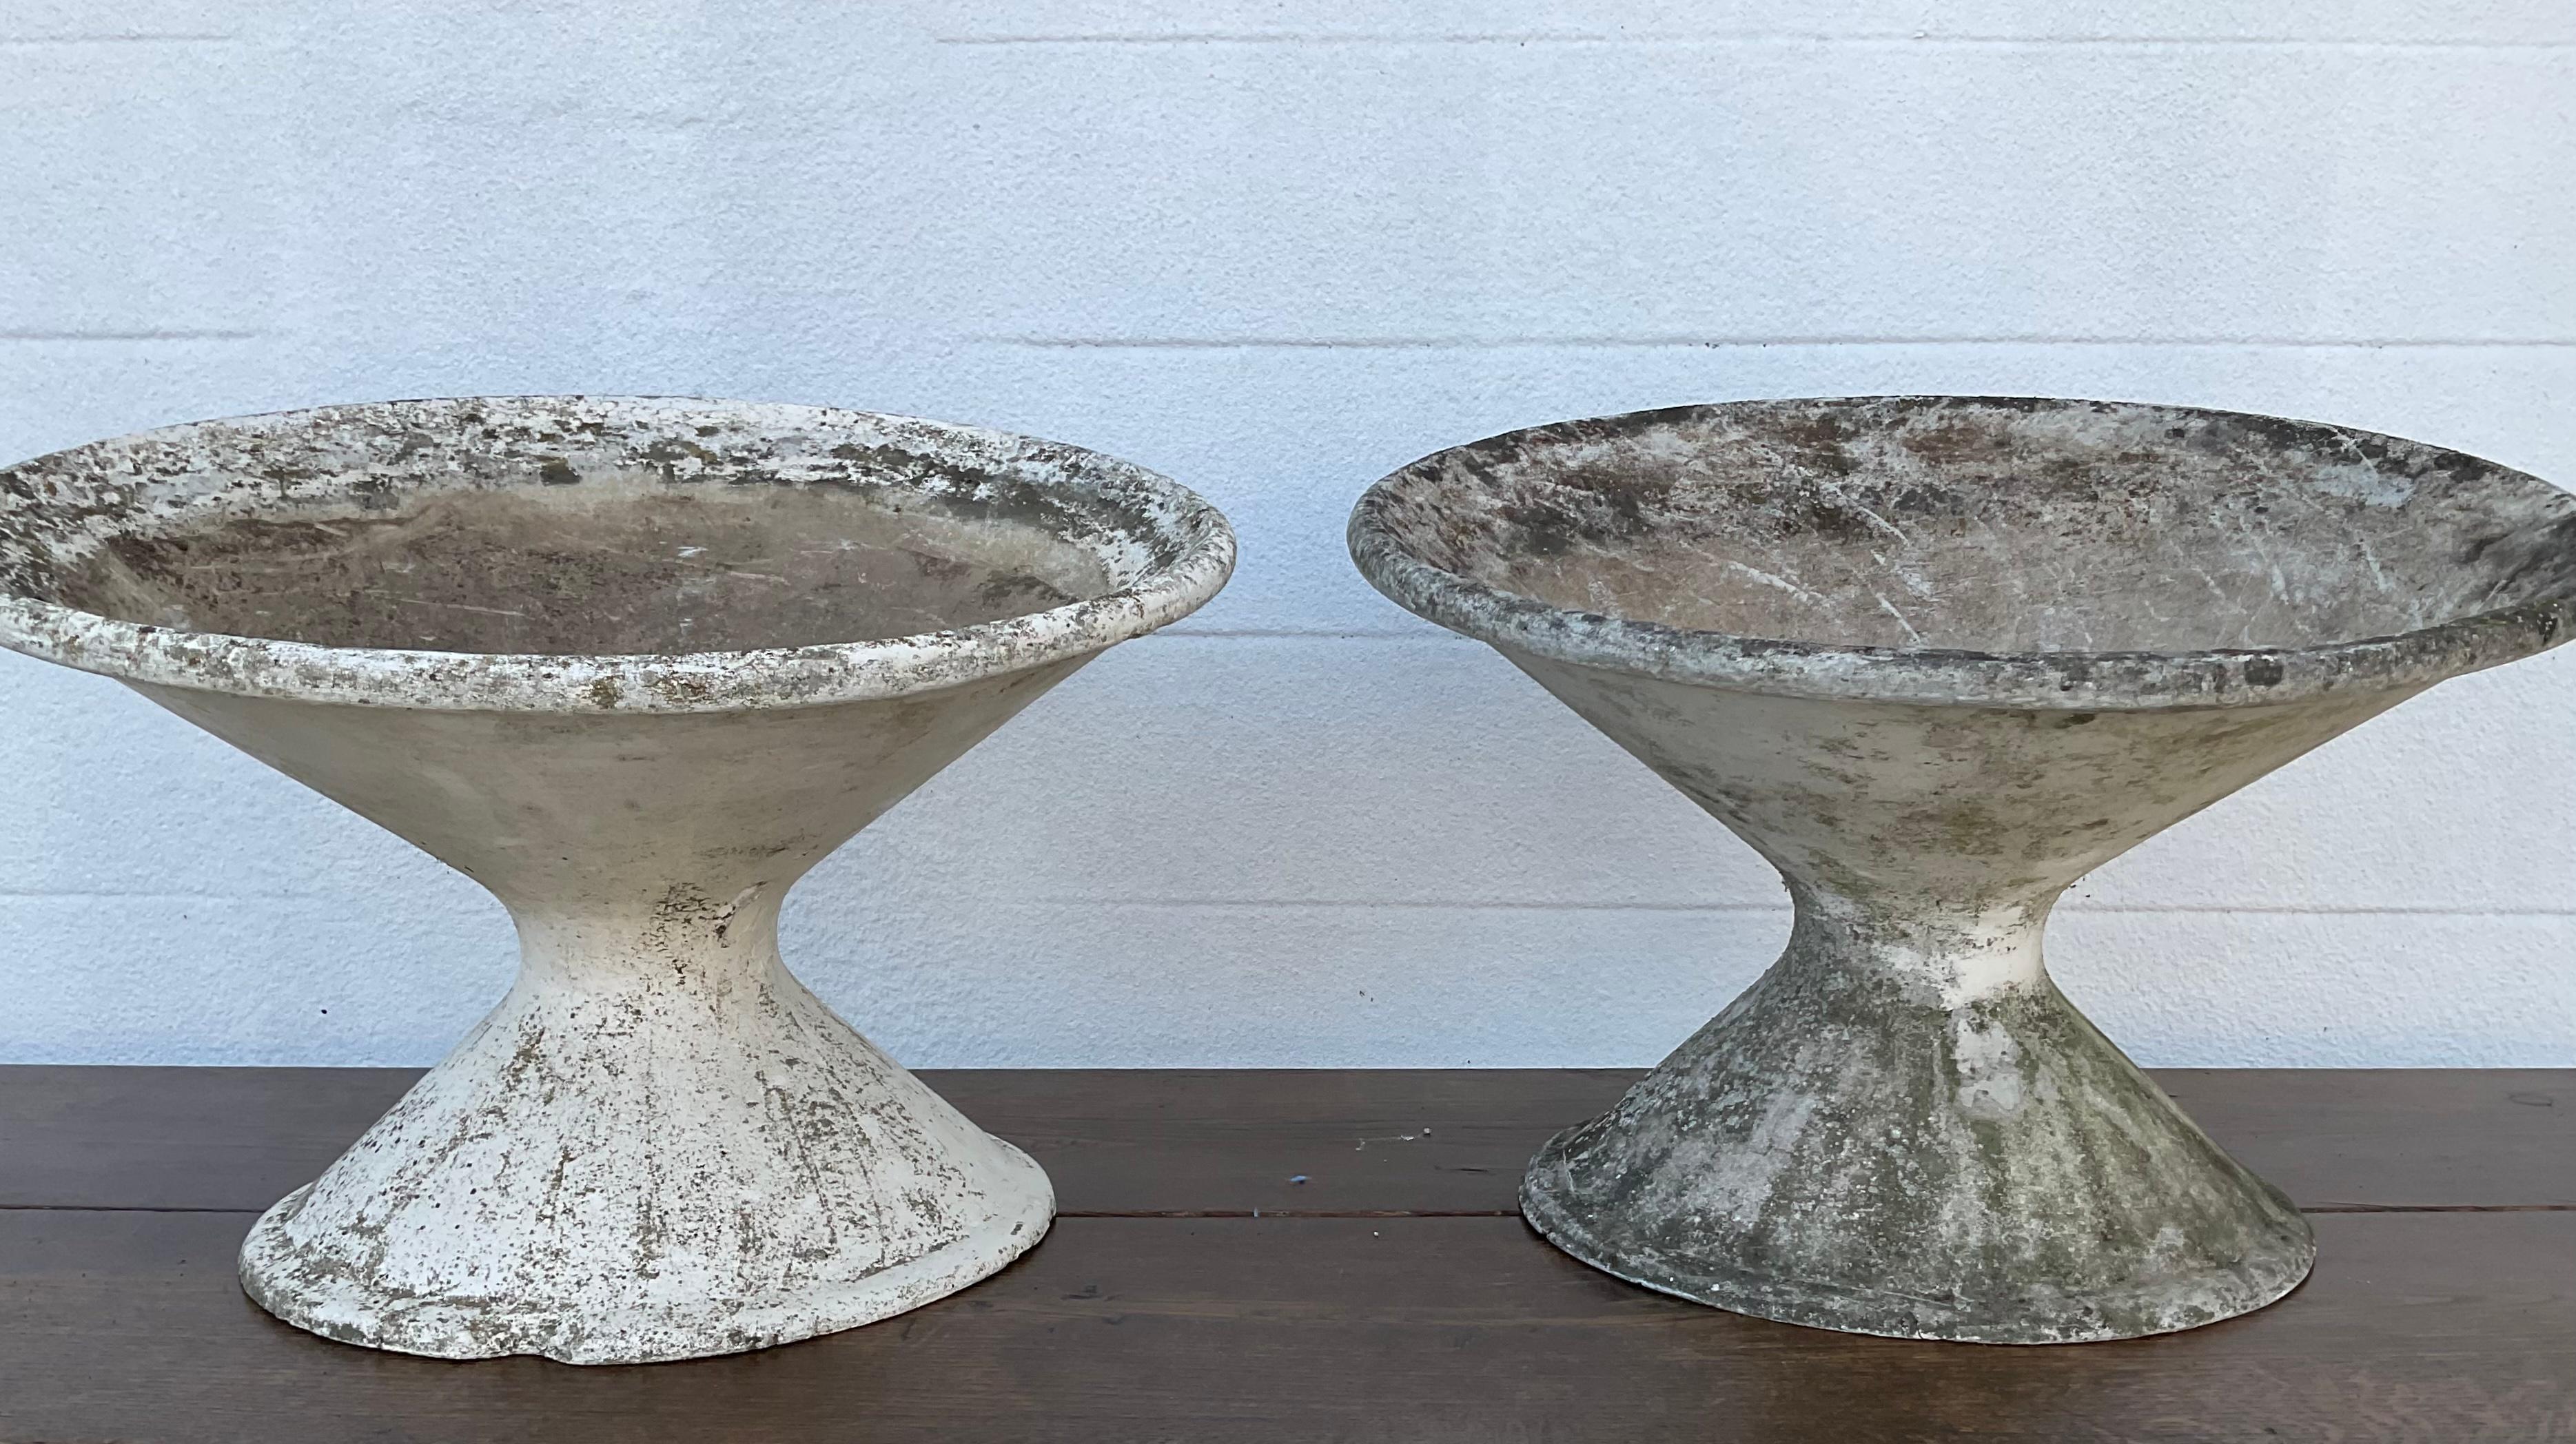 A wonderfully patinated pair of tilted or off-kilter planters that were designed by Willy Guhl. Made from fibrous cement. Beautifully weathered over the decades, making them unique vessels or pieces of art for the home, the patio or in the garden.